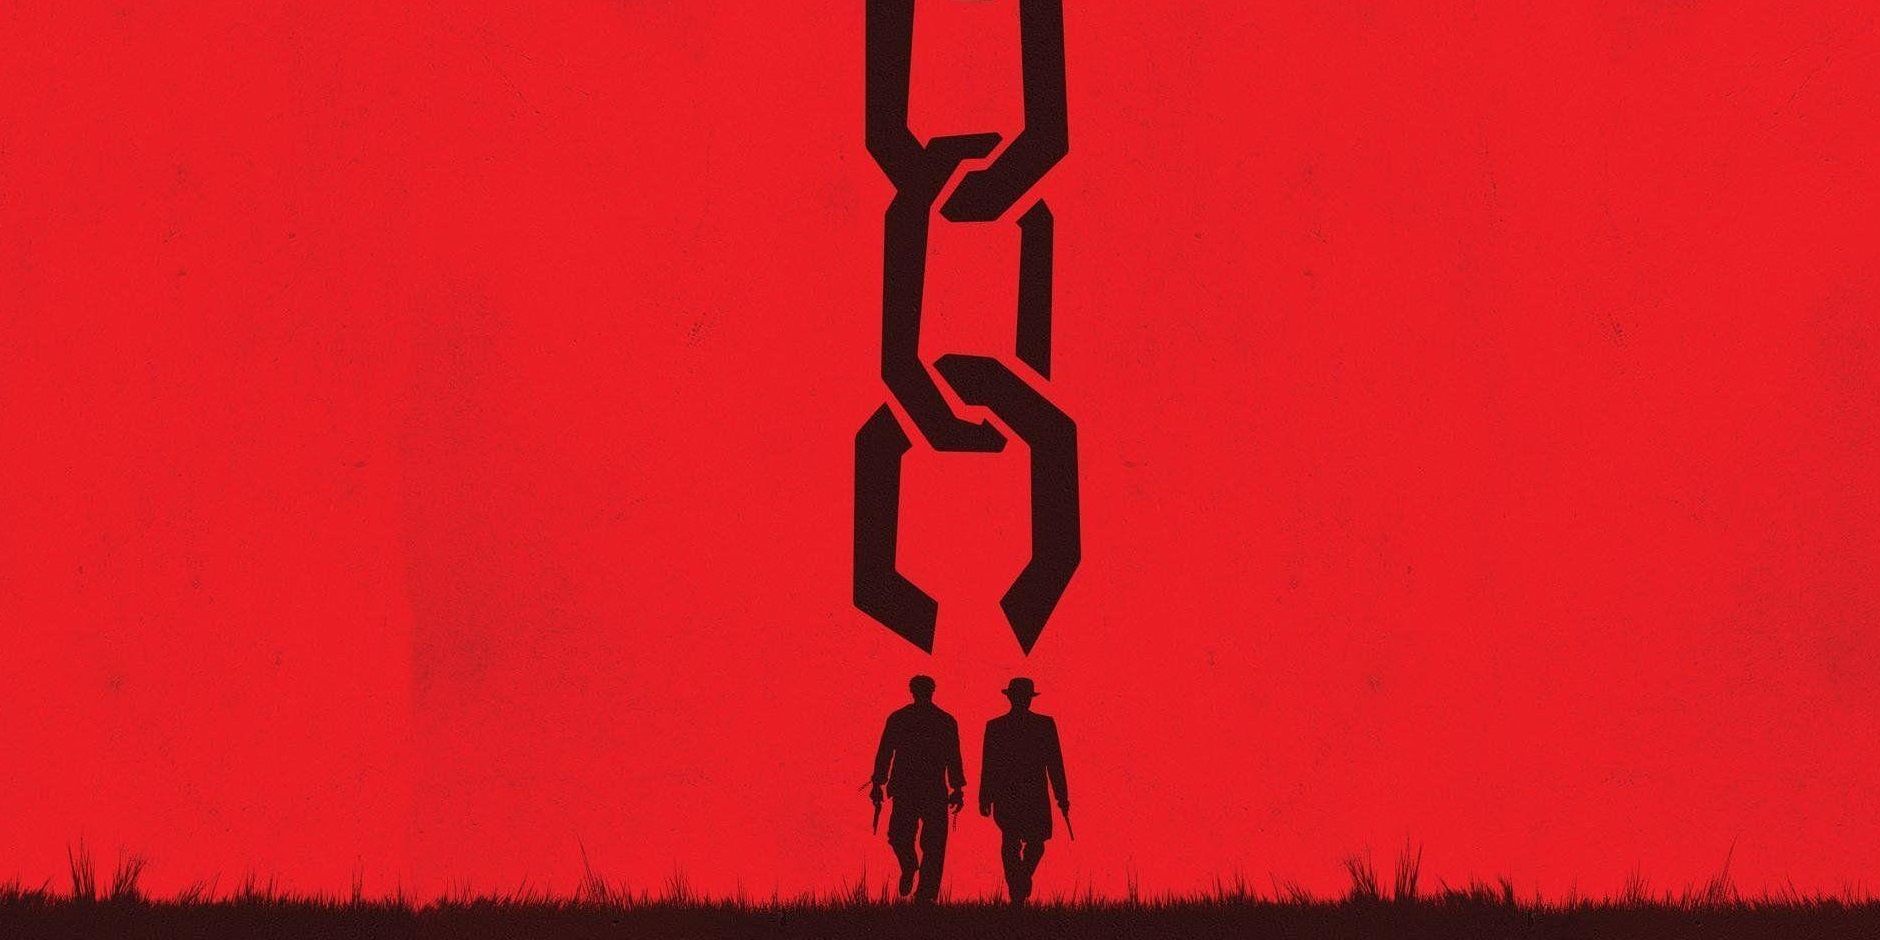 The poster for Django Unchained